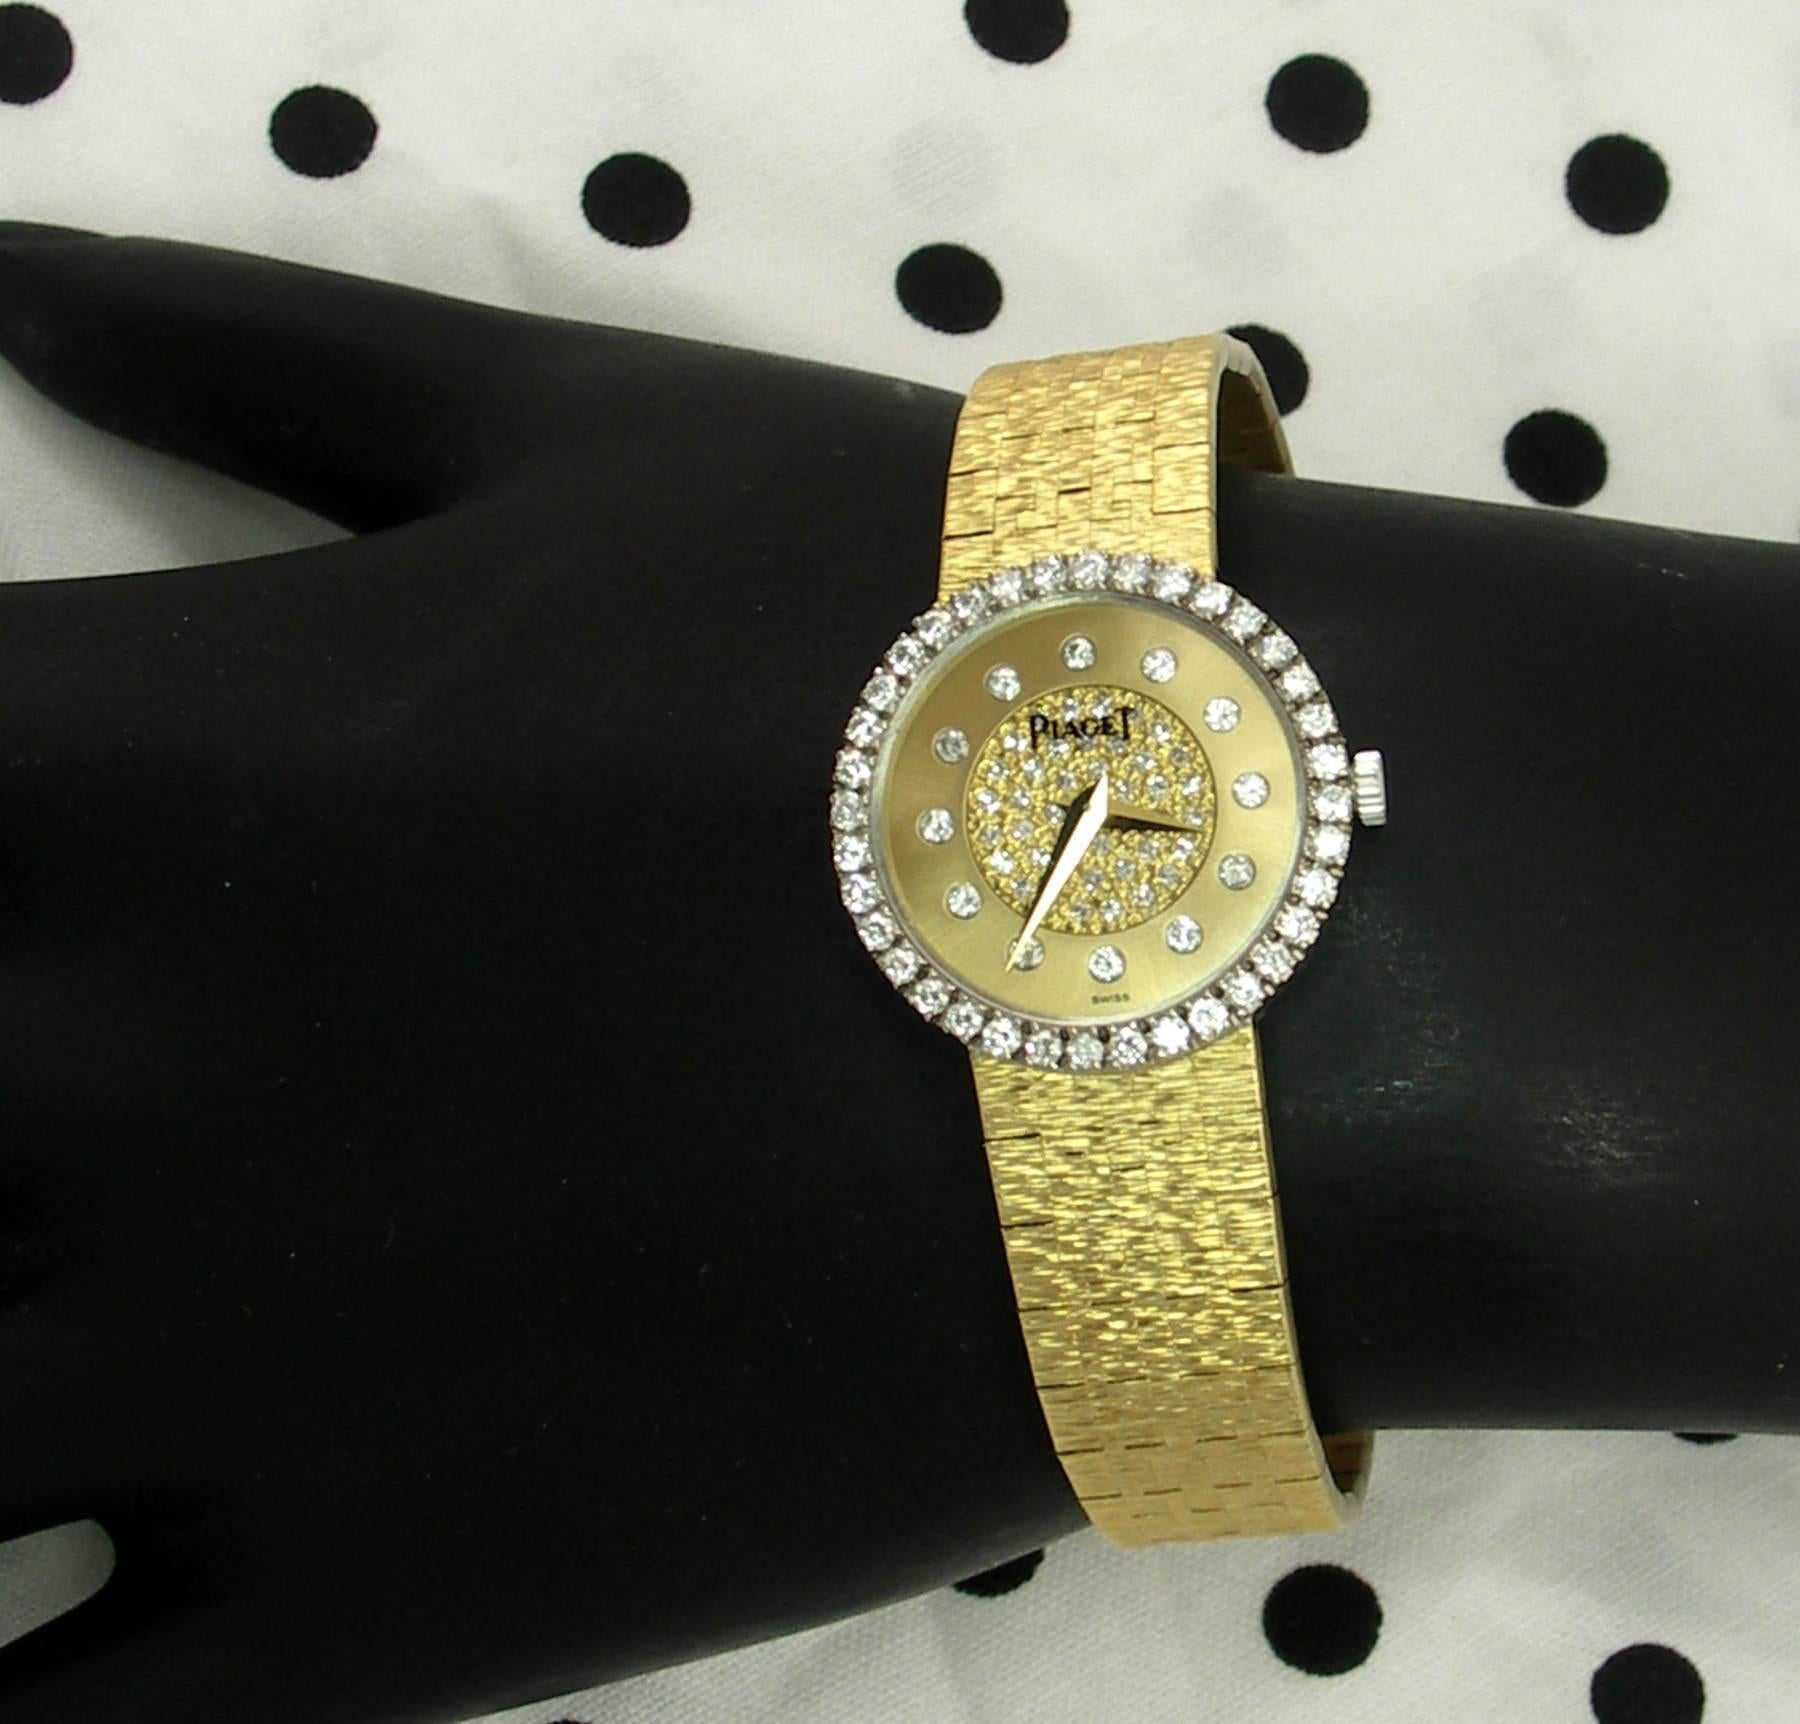 A lady's yellow gold Piaget wristwatch with a unique dial with a pave' set diamond center, and diamond markers. With a case measuring 23mm wide, the bezel is also set with round brilliant cut diamonds for a total approximate weight of 2ct. The watch